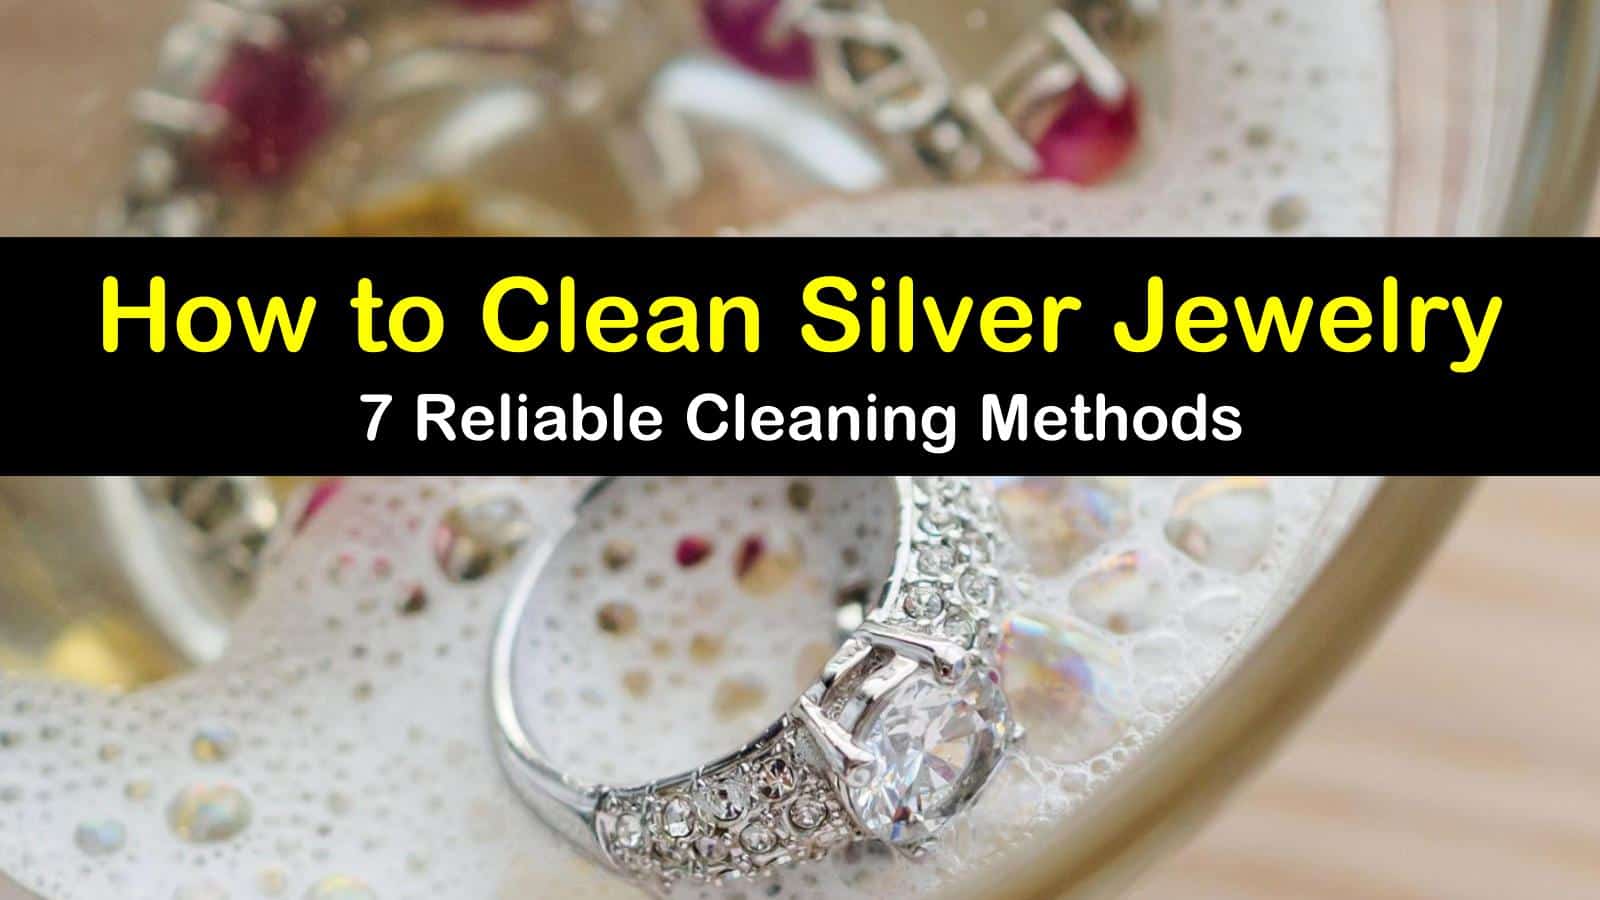 29 Reliable Ways to Clean Silver Jewelry